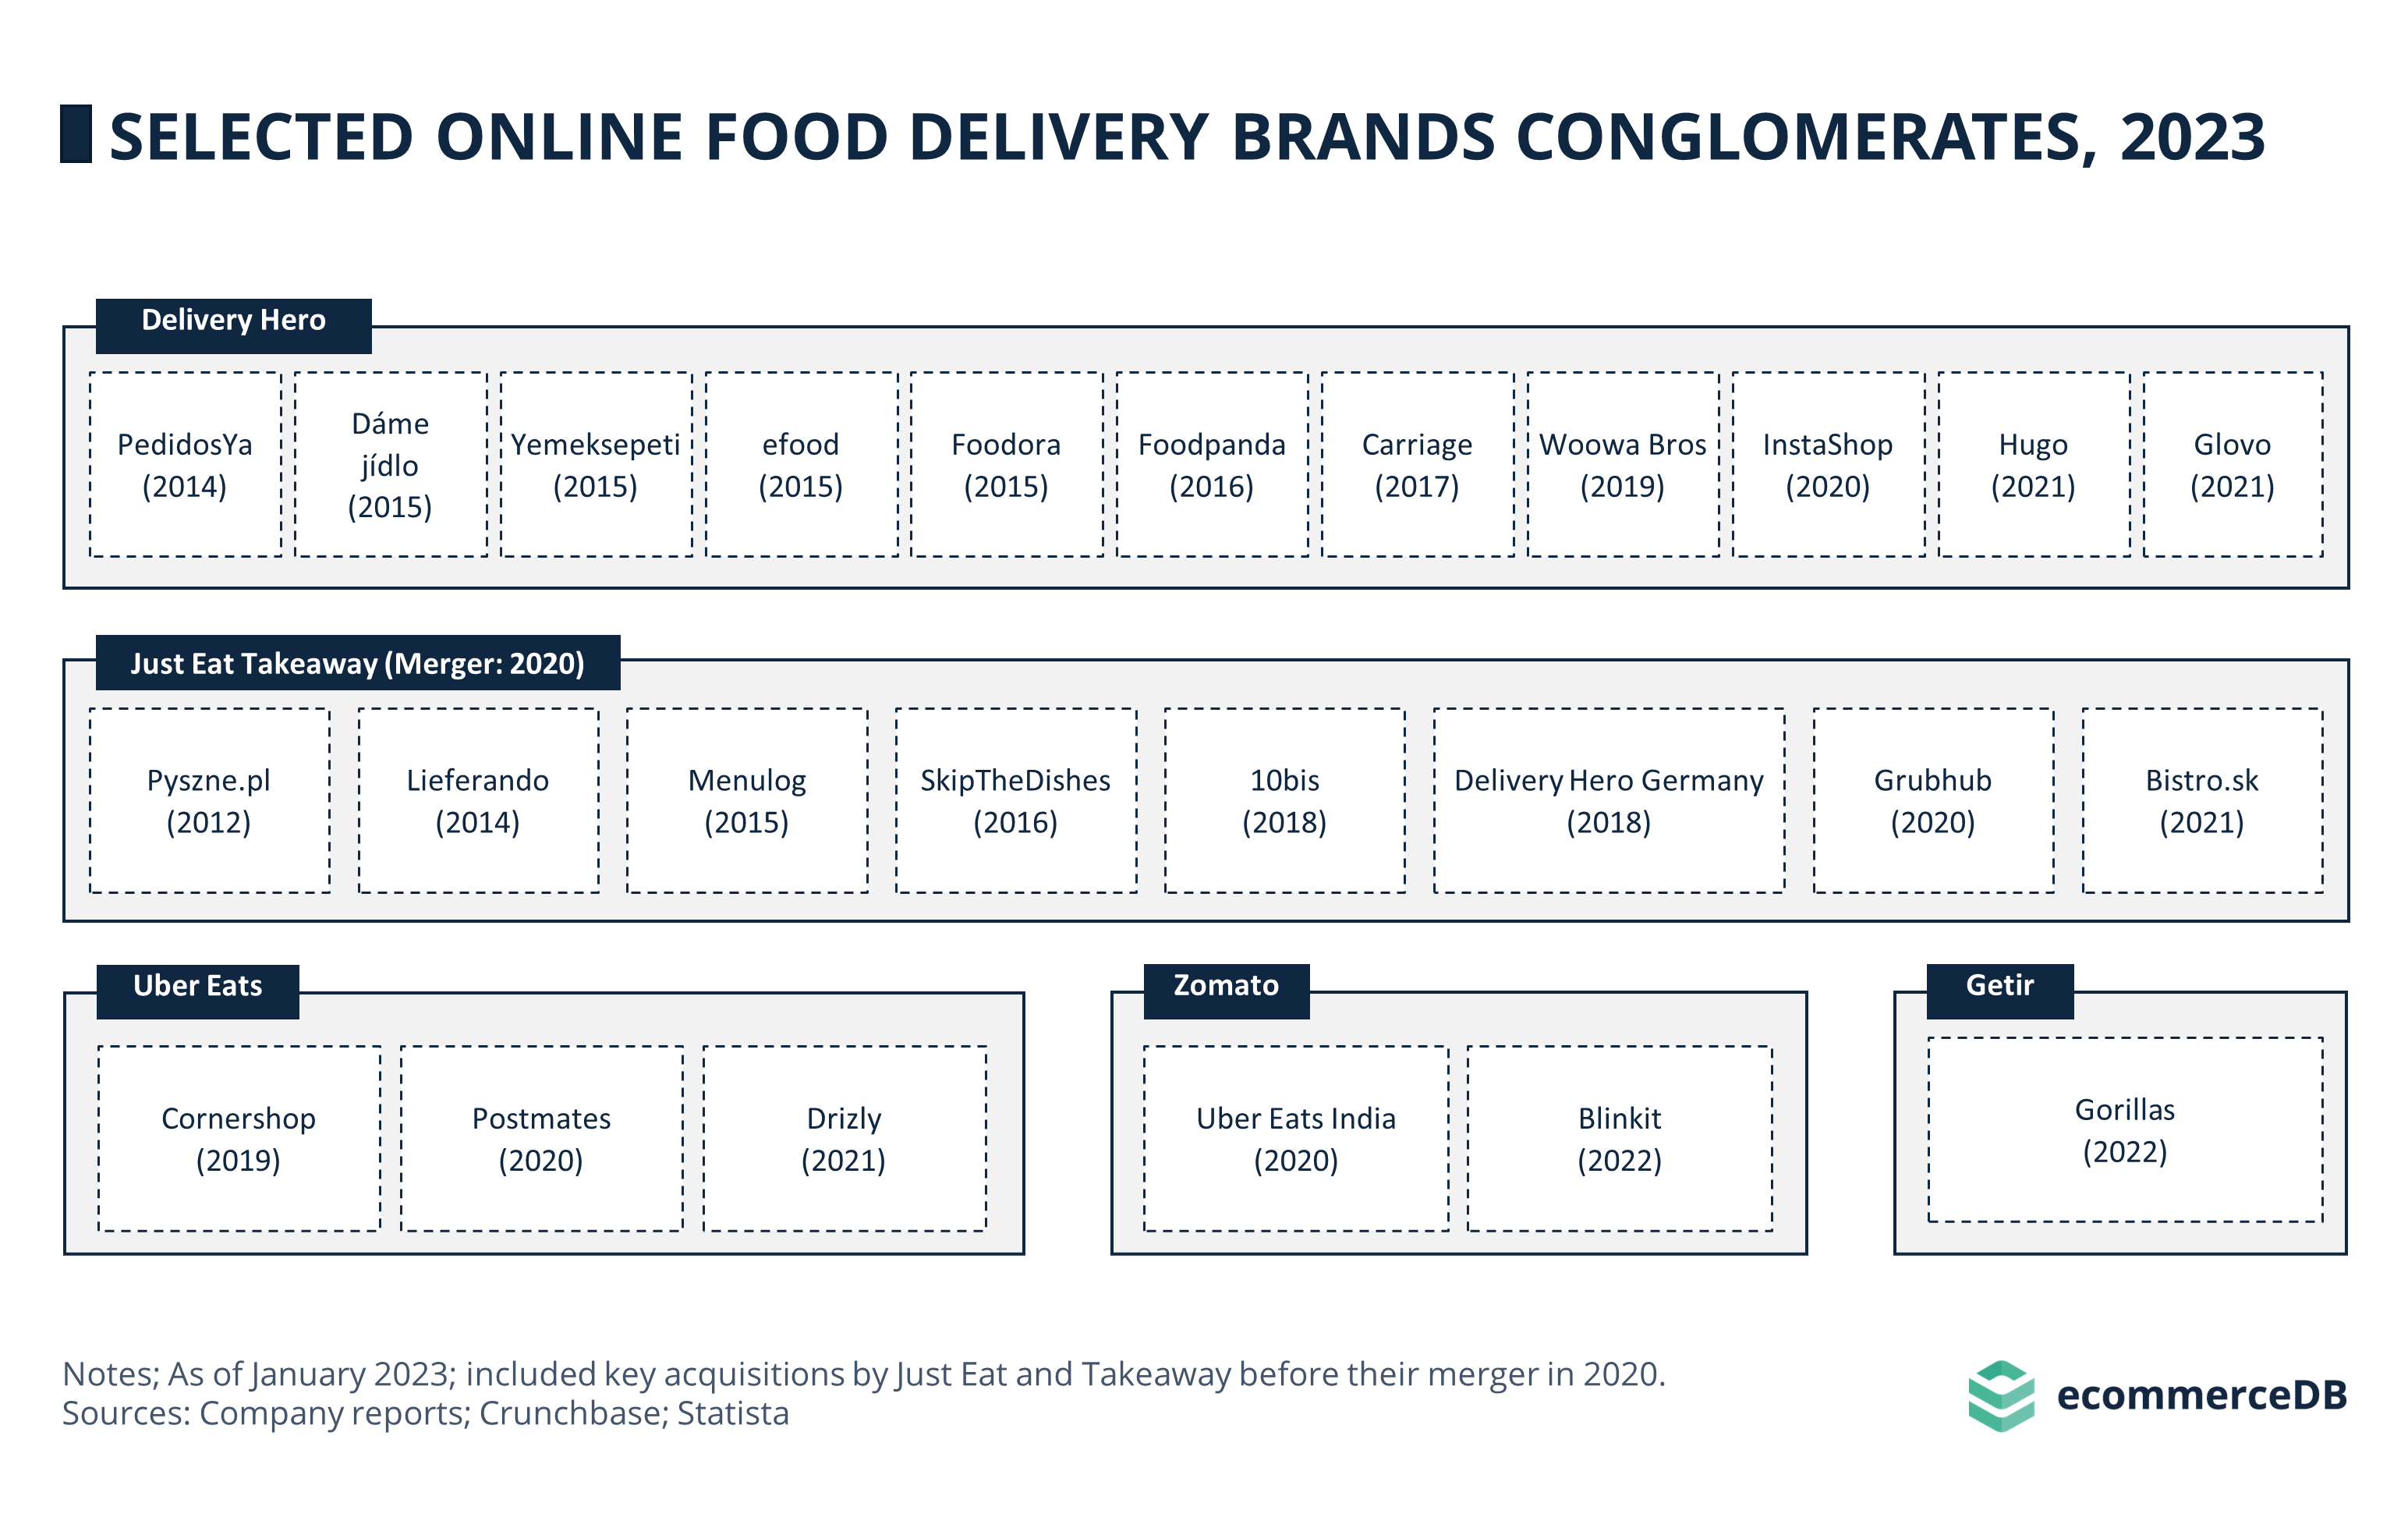 Rise of online food delivery brand conglomerates